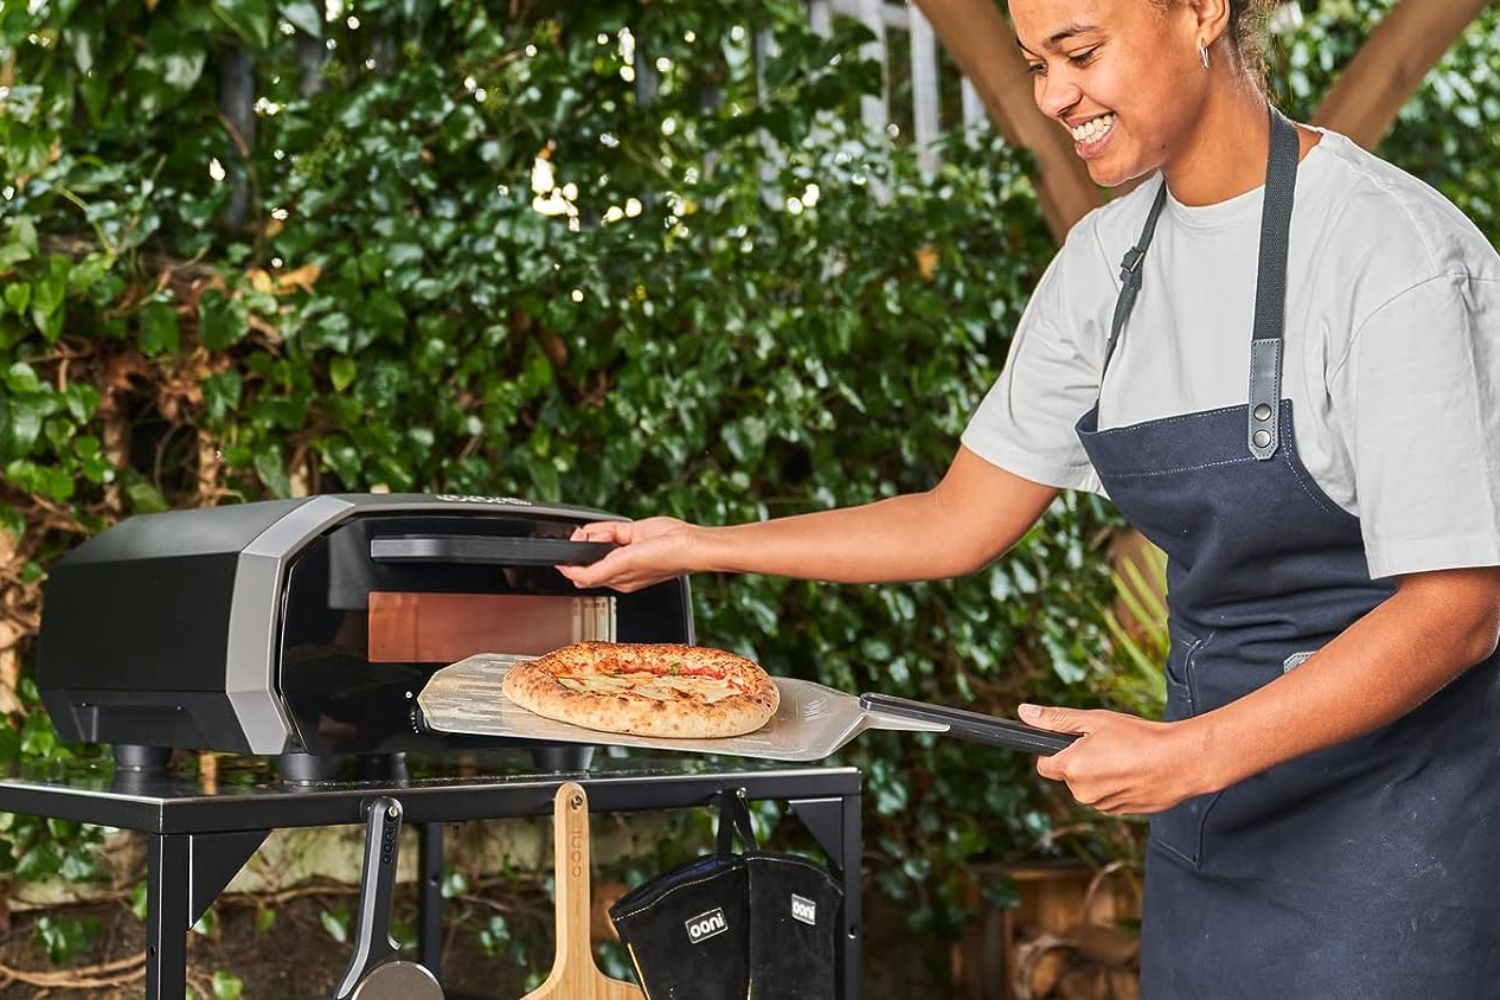 A person pulling a delicious-looking pizza out of the best electric pizza oven option that's set up outdoors